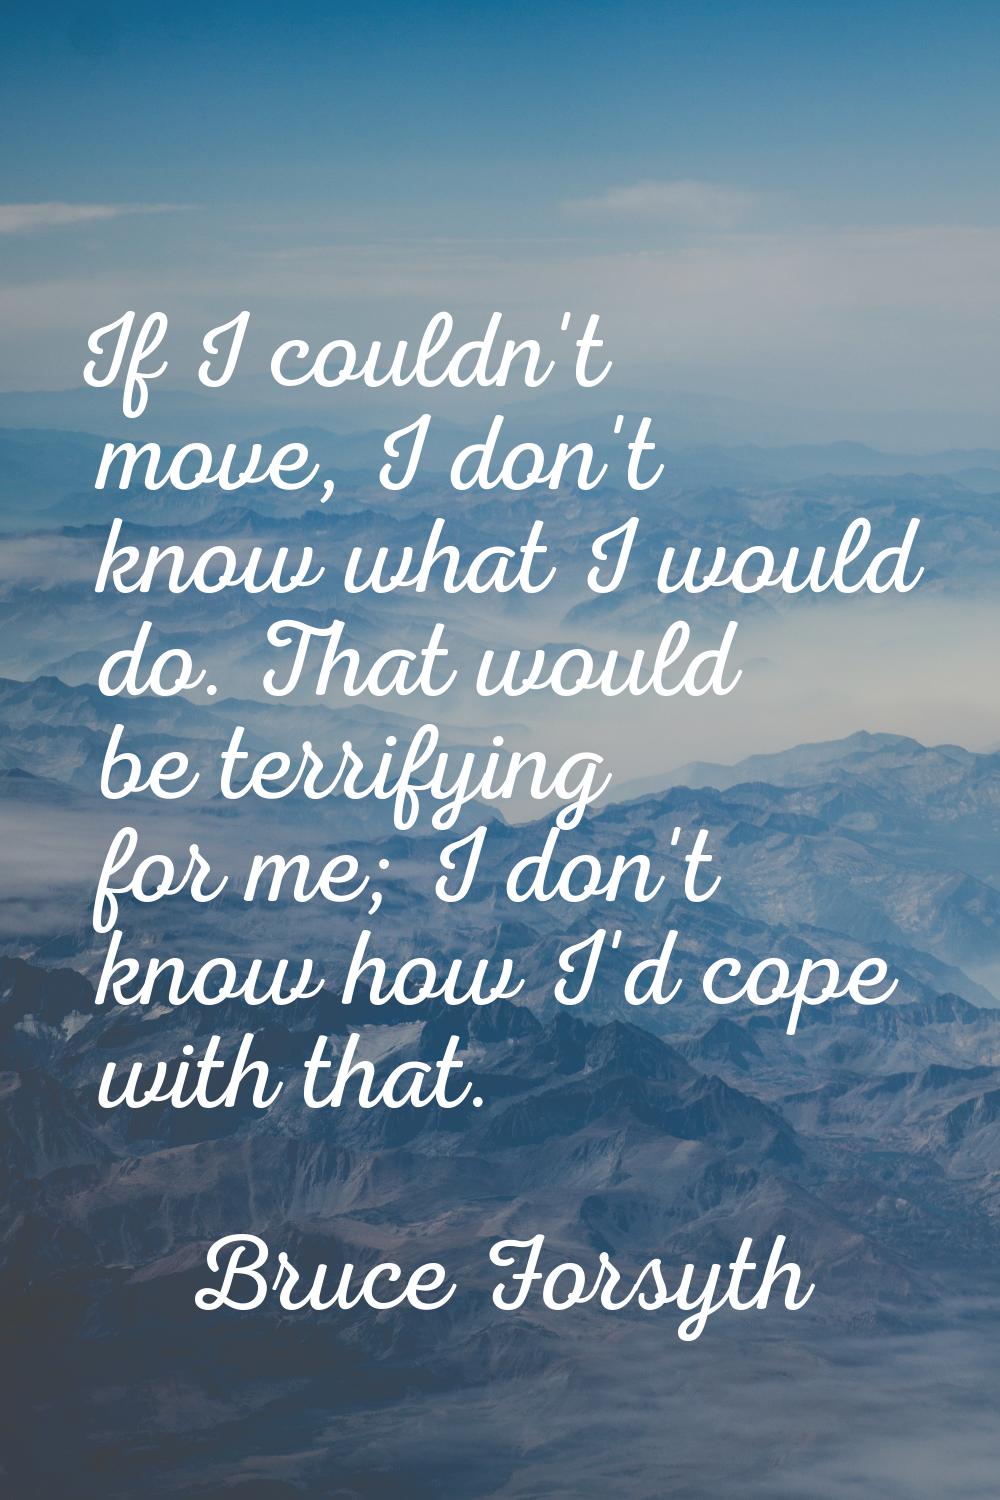 If I couldn't move, I don't know what I would do. That would be terrifying for me; I don't know how